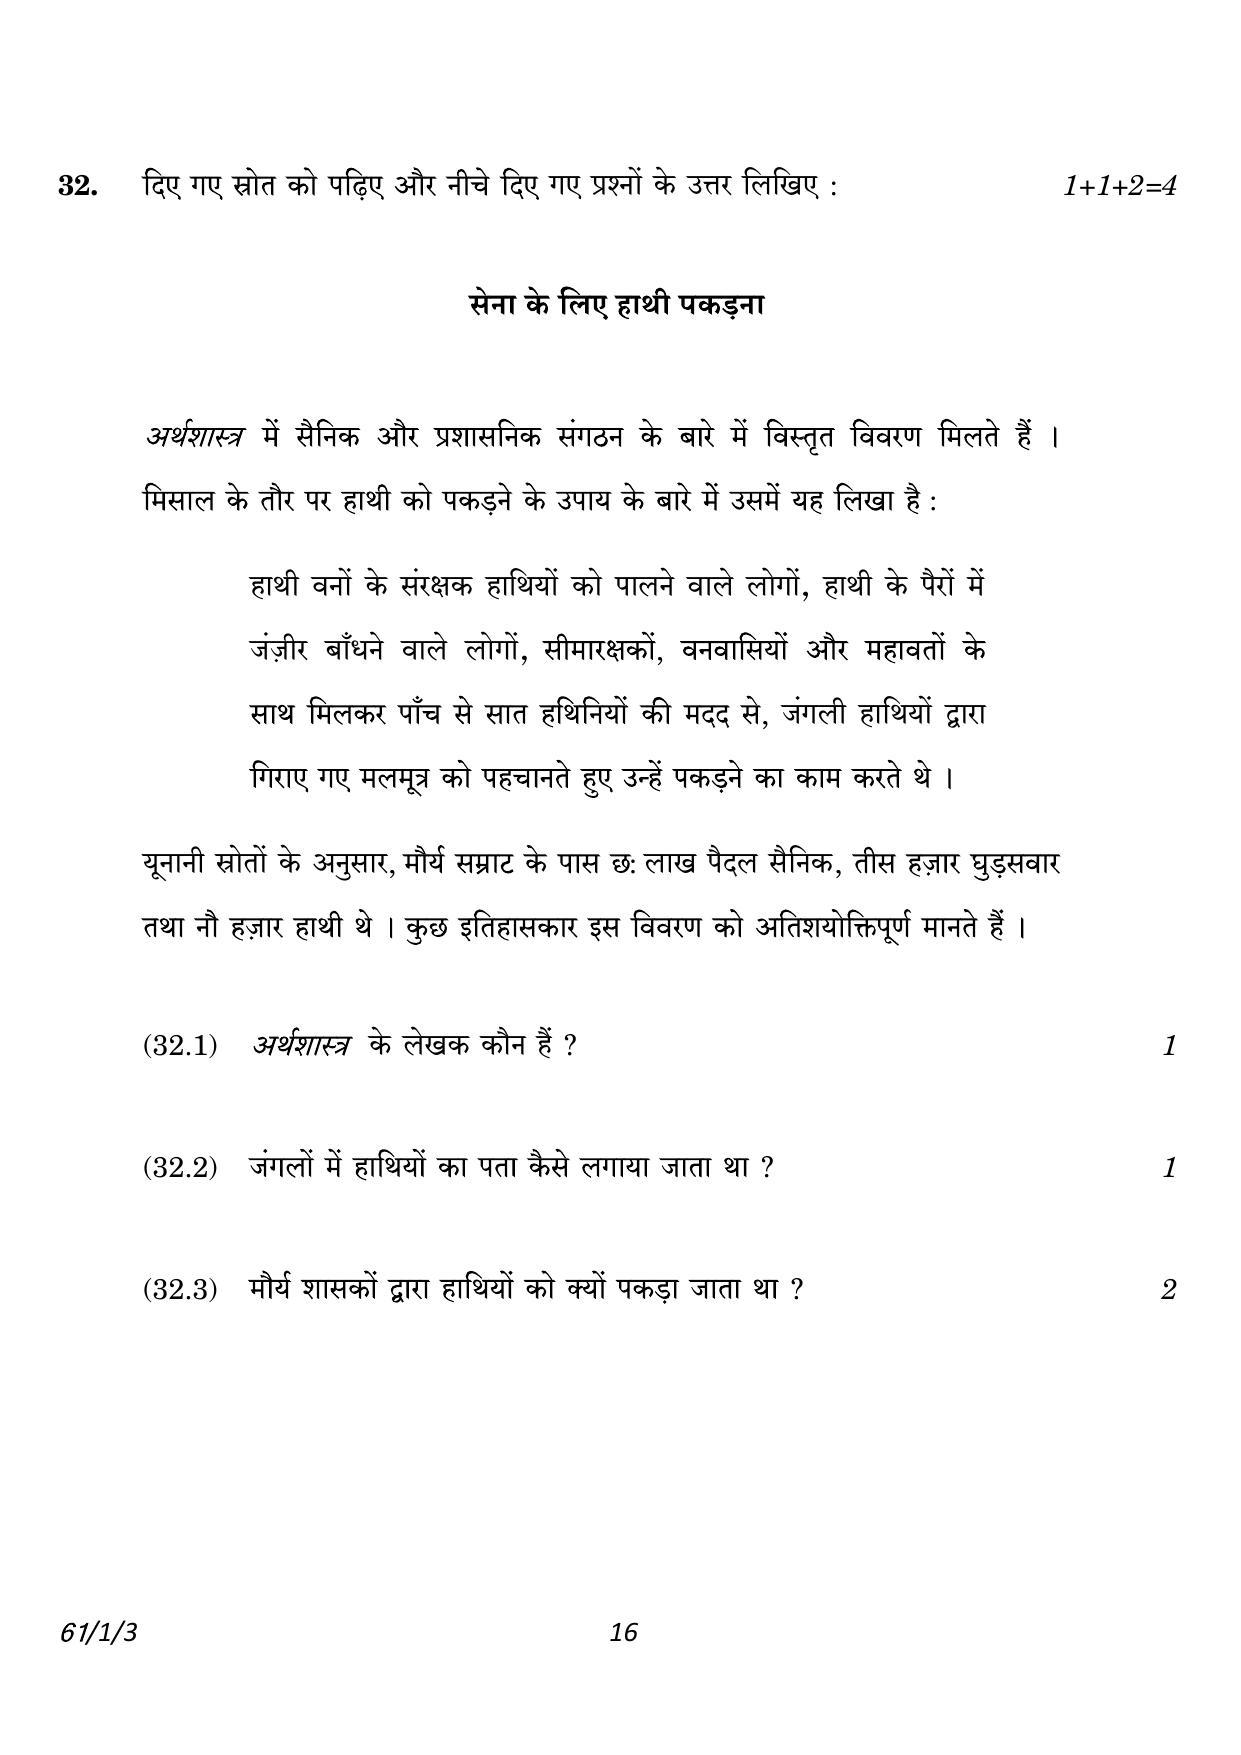 CBSE Class 12 61-1-3 History 2023 Question Paper - Page 16